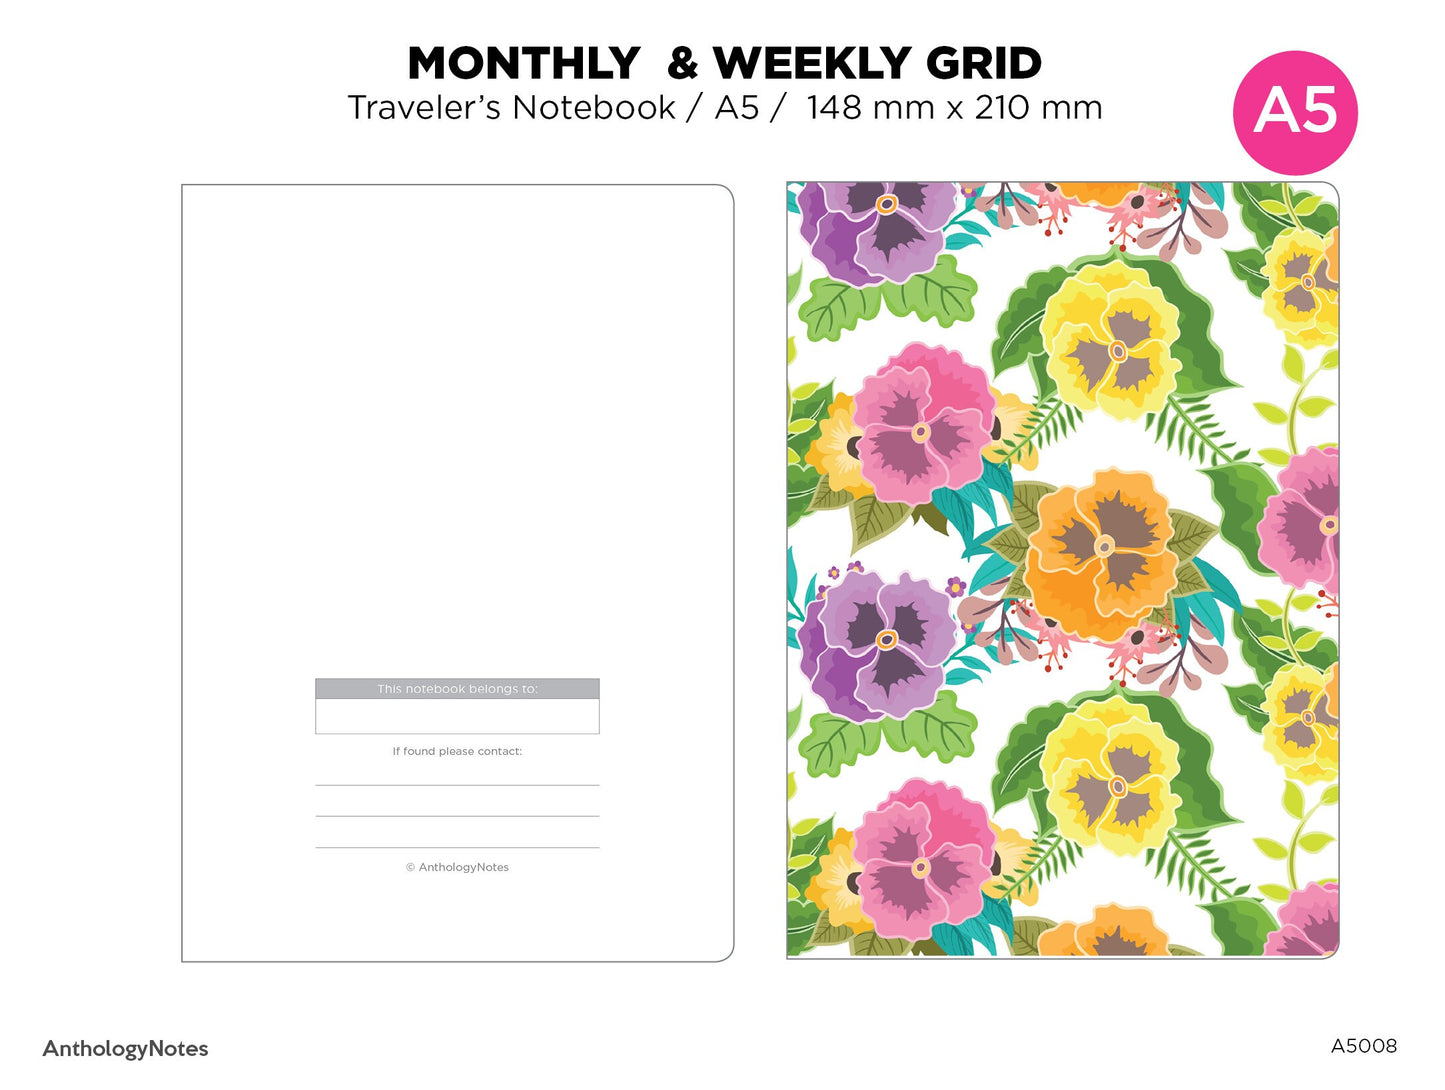 A5 Weekly & Monthly Planner Undated Traveler's Notebook Printable Insert Refill GRID Minimalist Sunday or Monday Start A5008